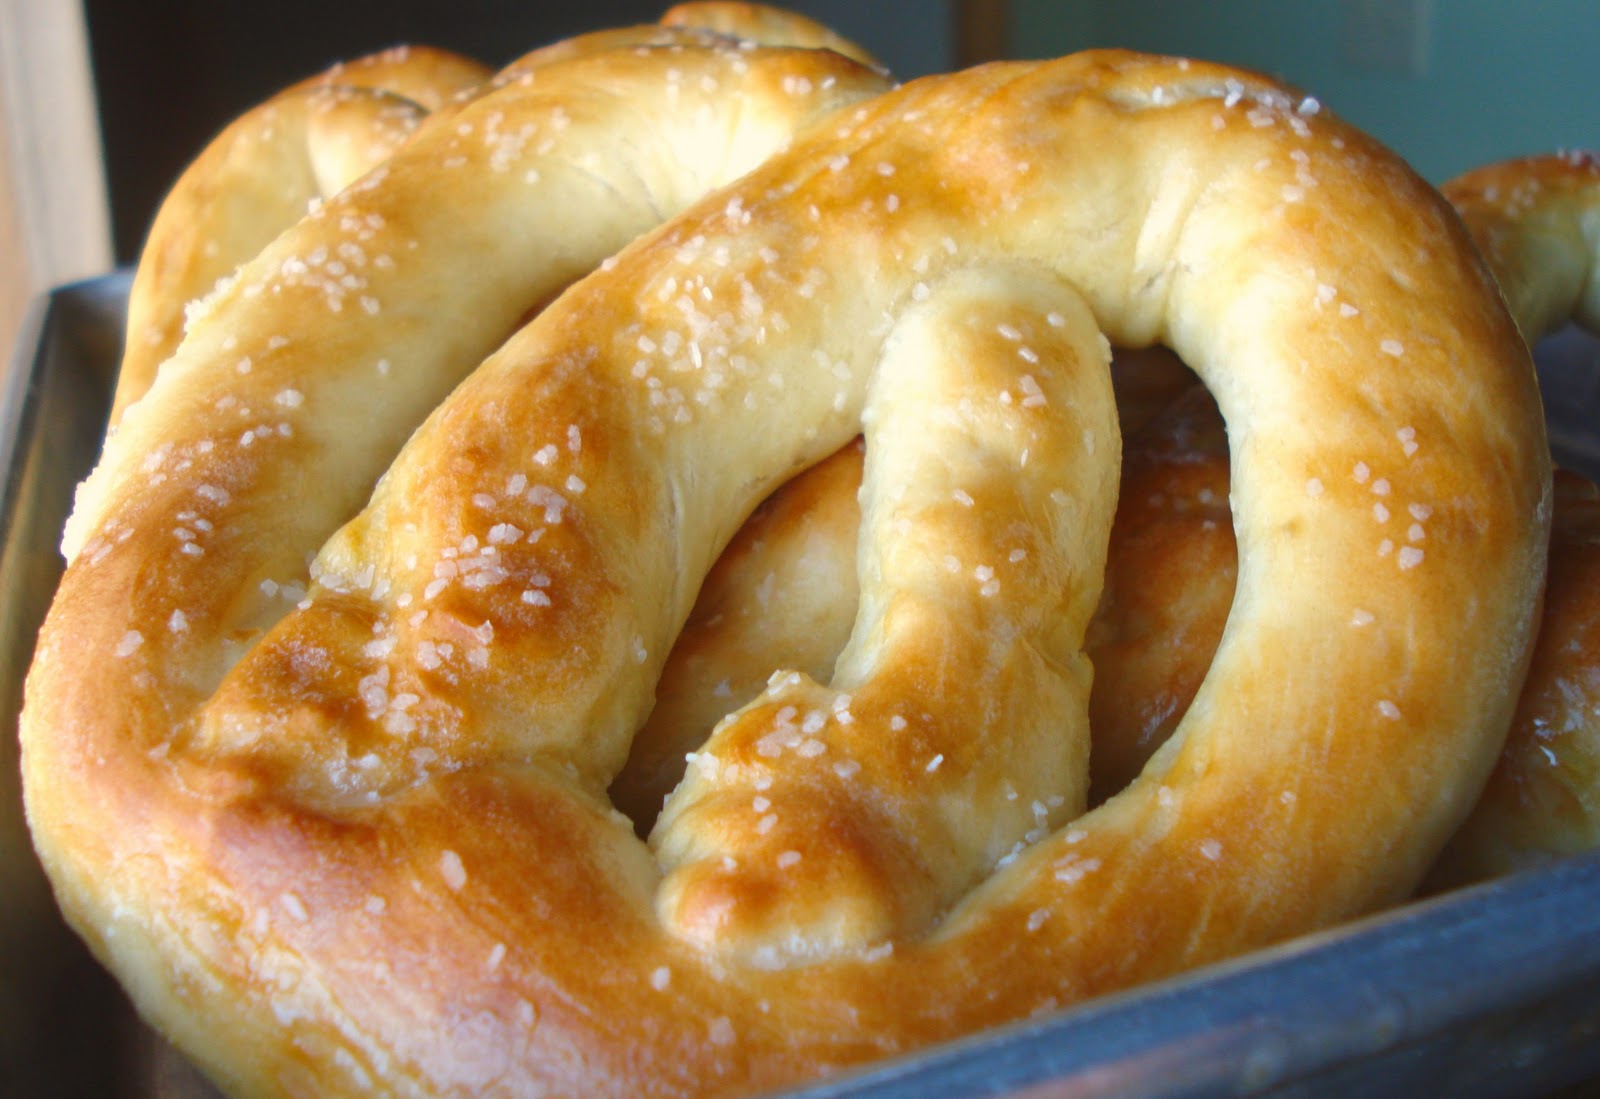 House 344: Where We Learned to Live, Love, and Cook: Giant Pretzels ...